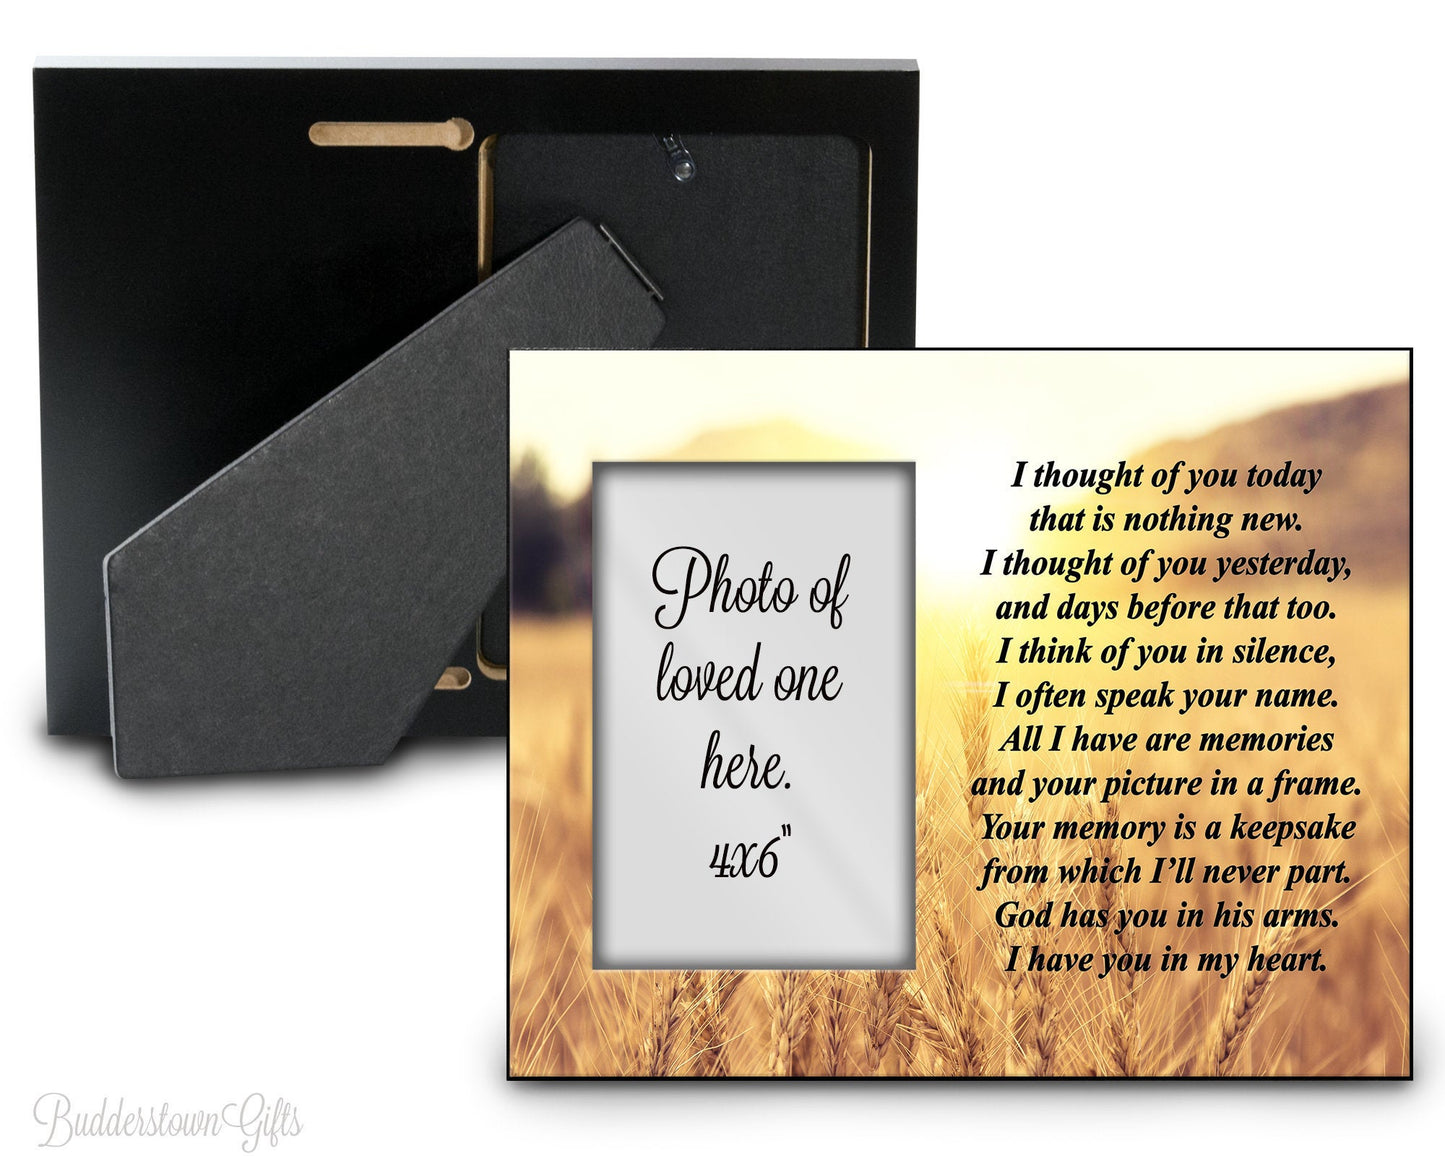 Thought of you today - Vers. 3 - remembrance, tribute, Memorial Frame, sympathy, loss of loved one